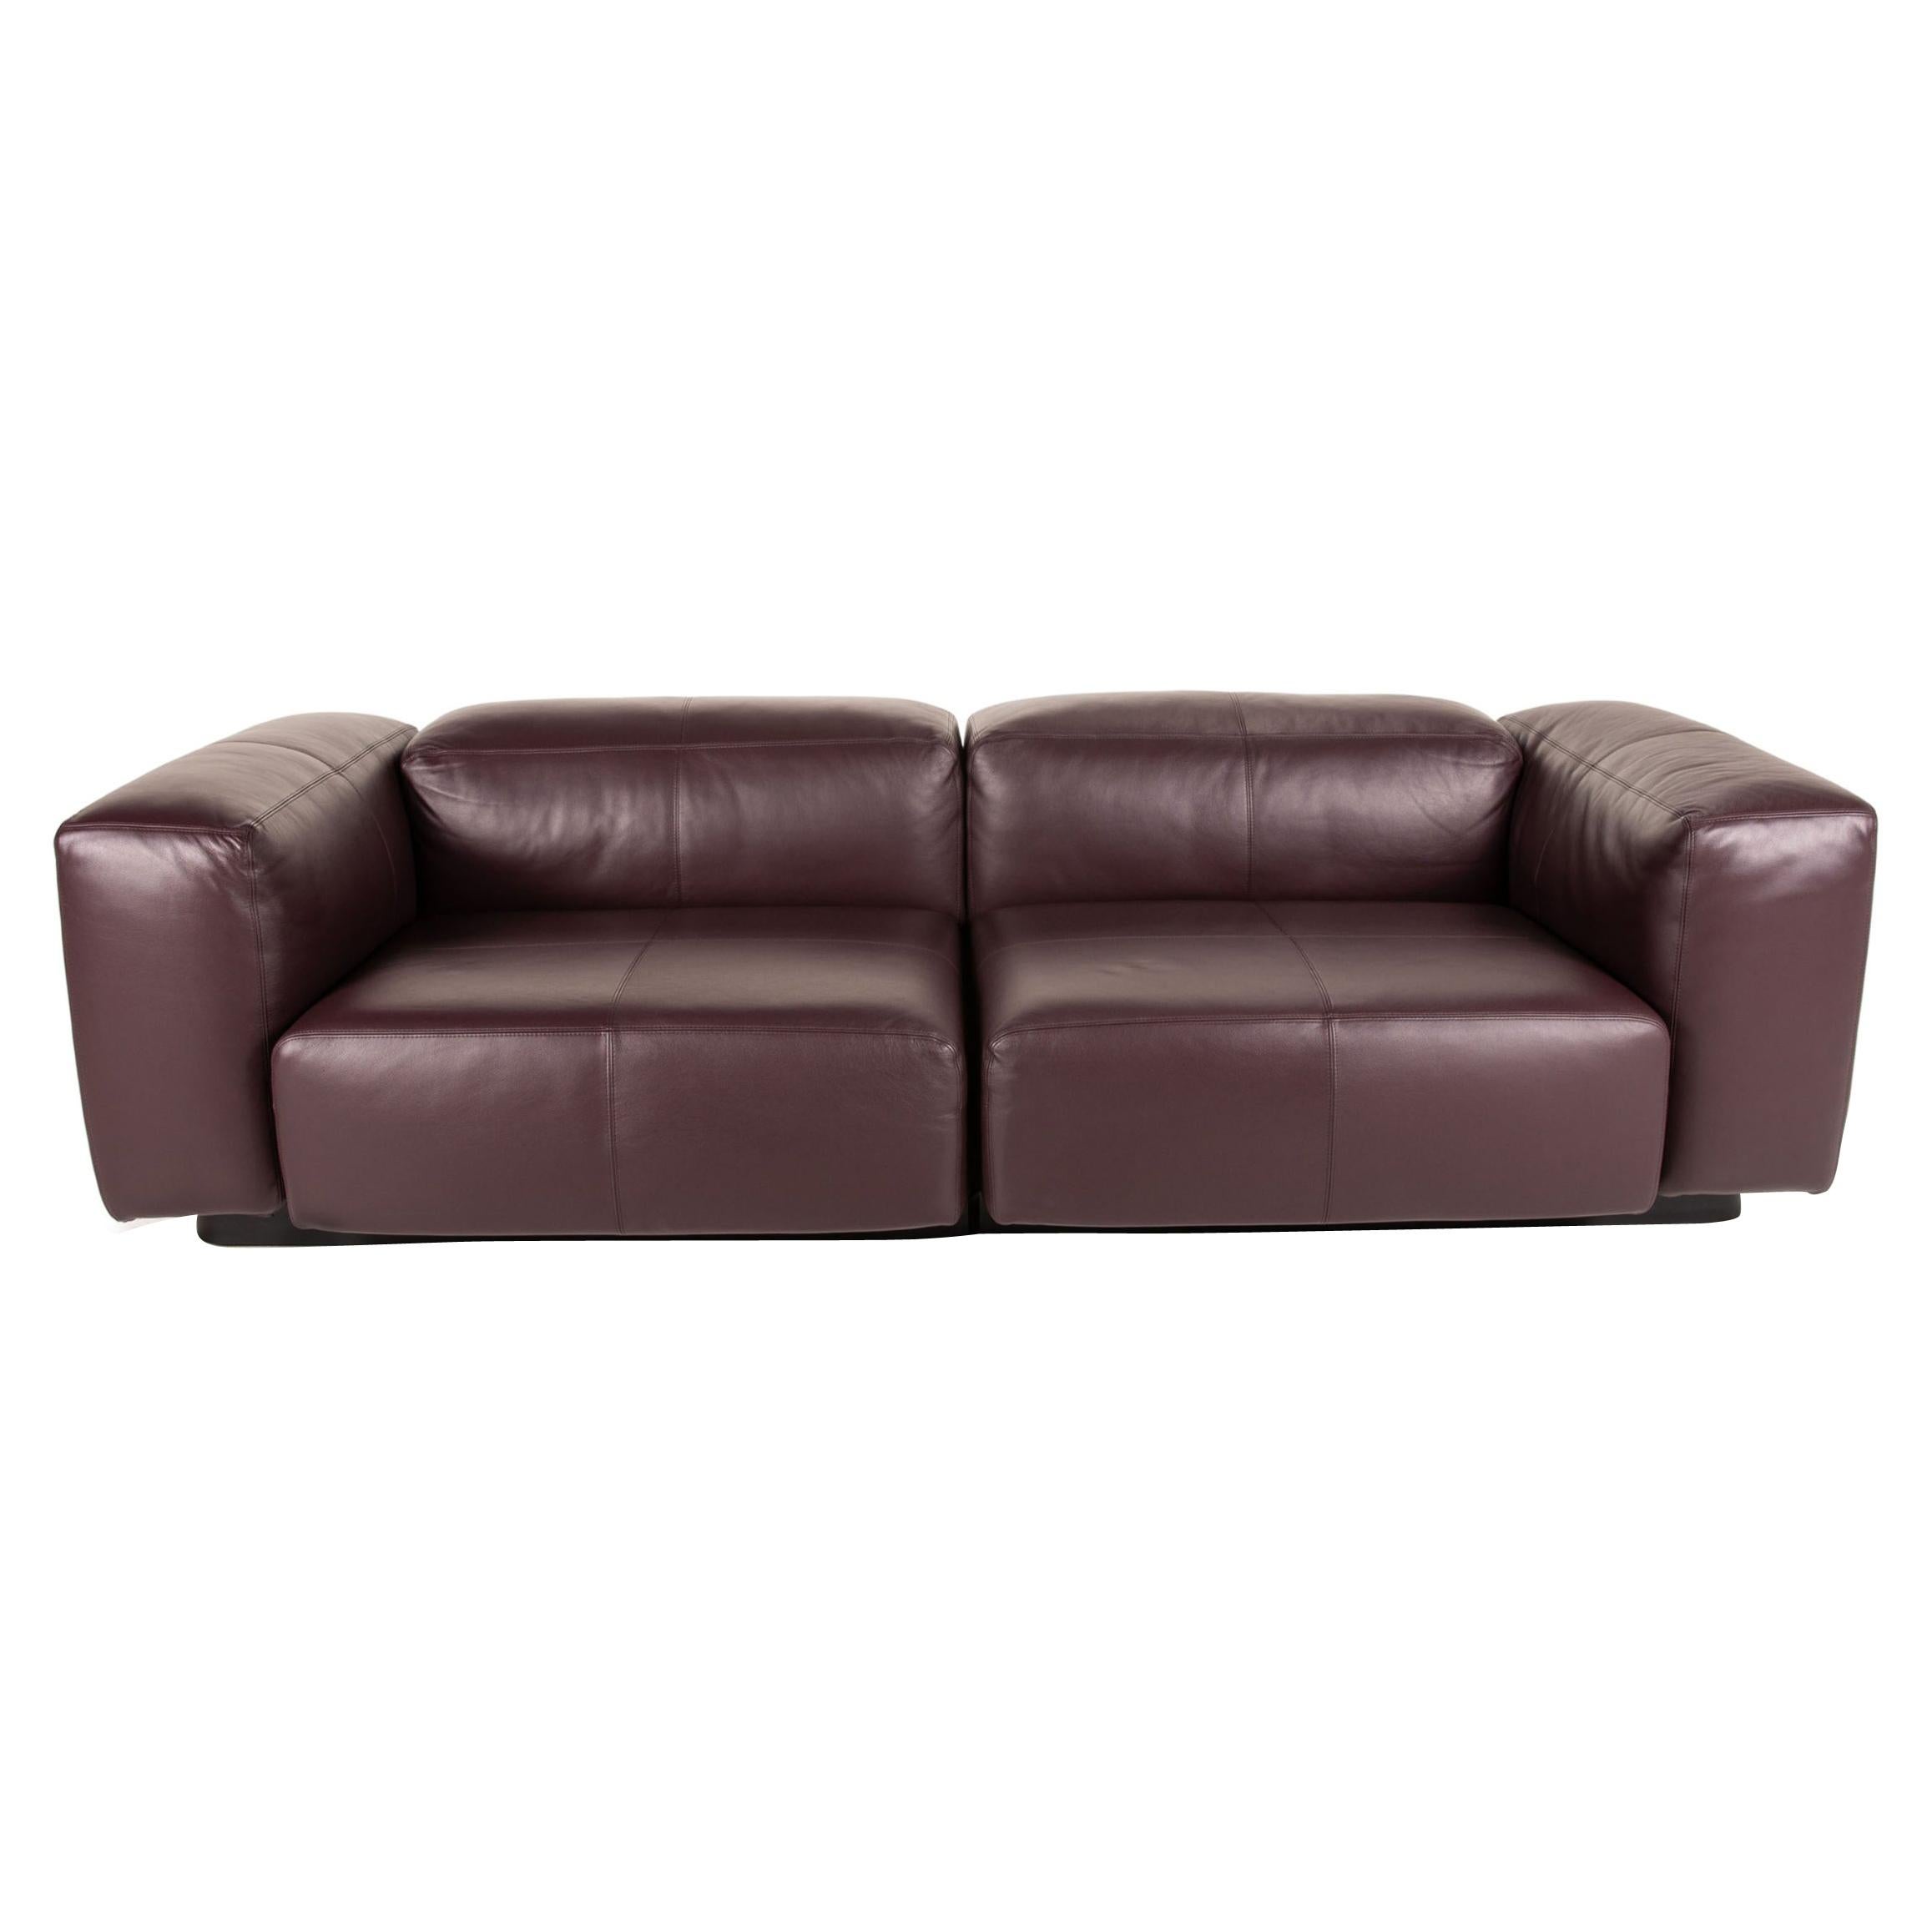 Vitra Soft Modular Leather Sofa Purple Two-Seater Couch For Sale